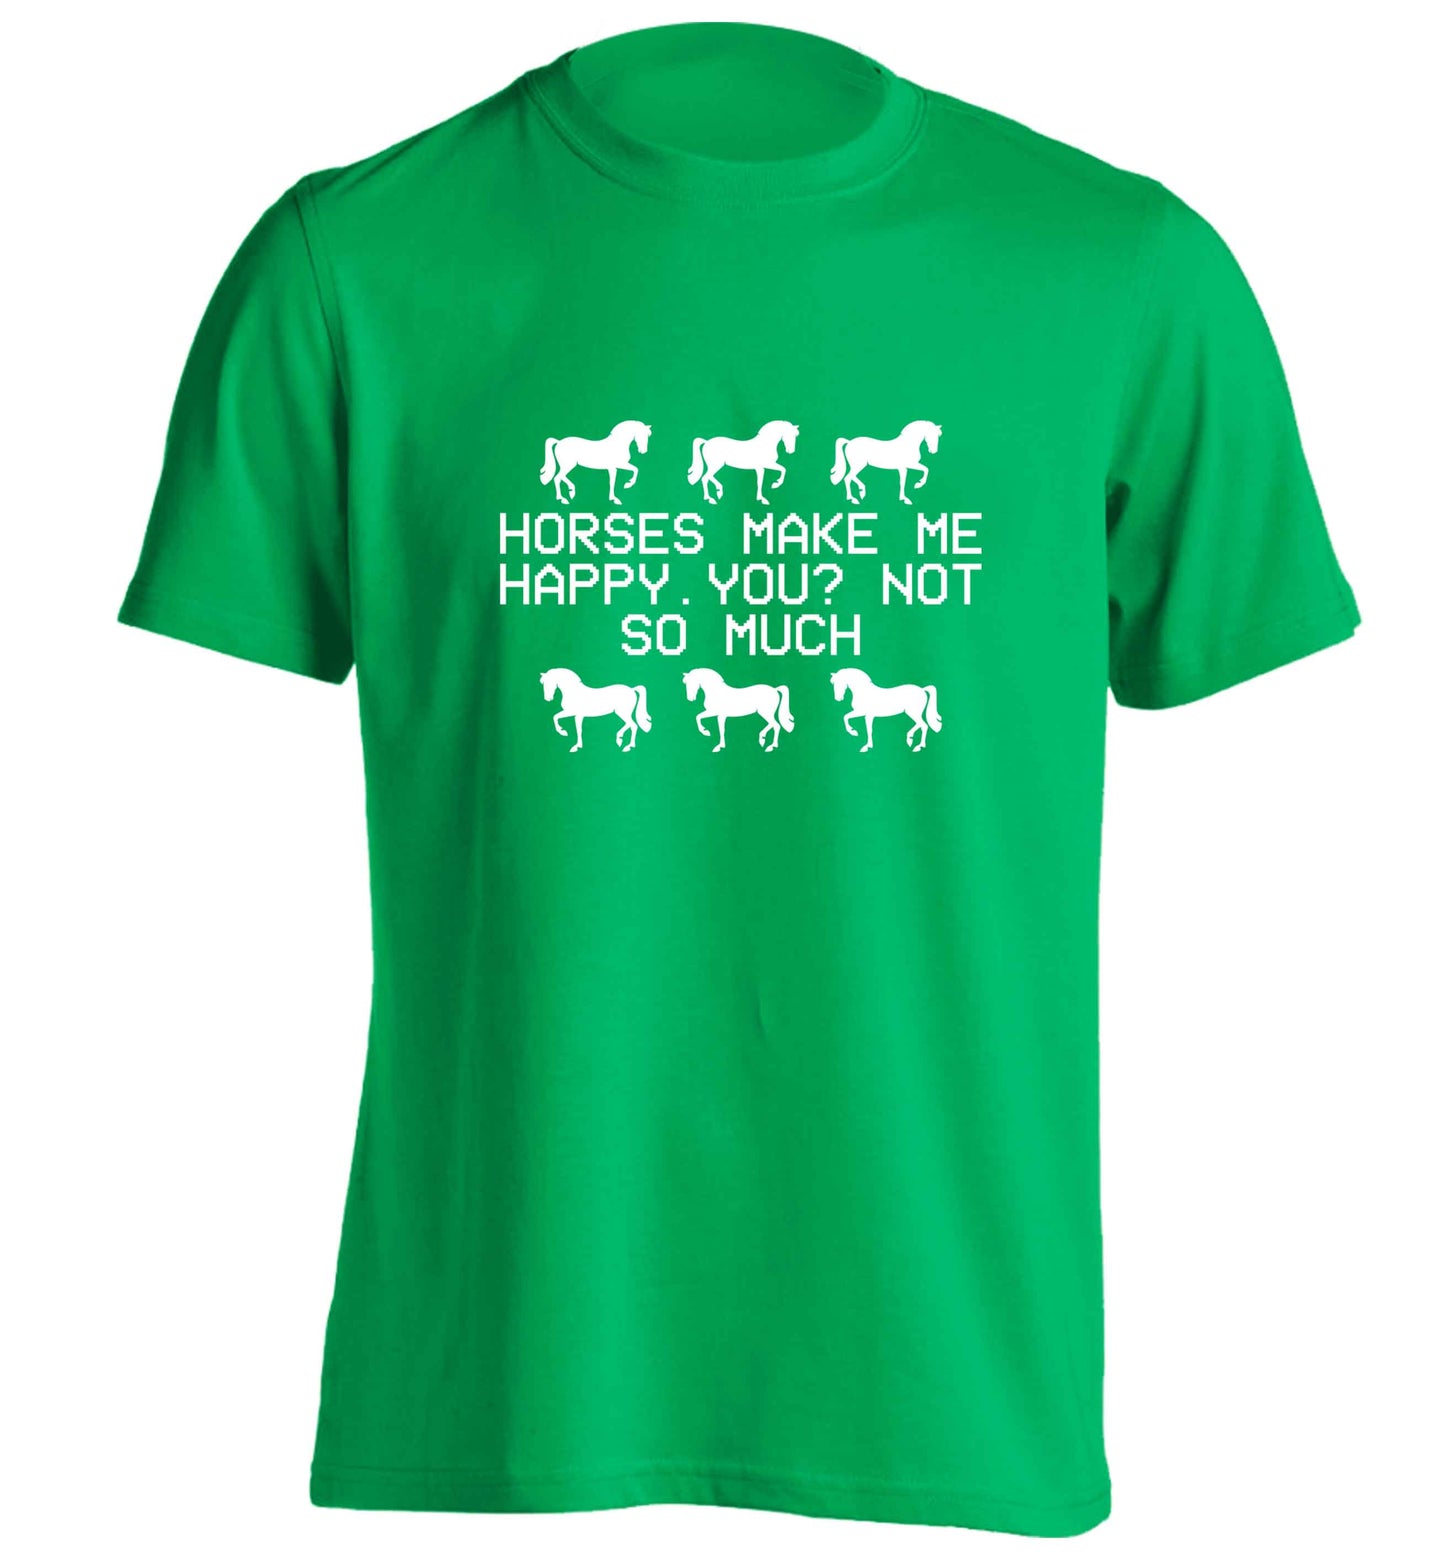 Horses make me happy, you not so much adults unisex green Tshirt 2XL